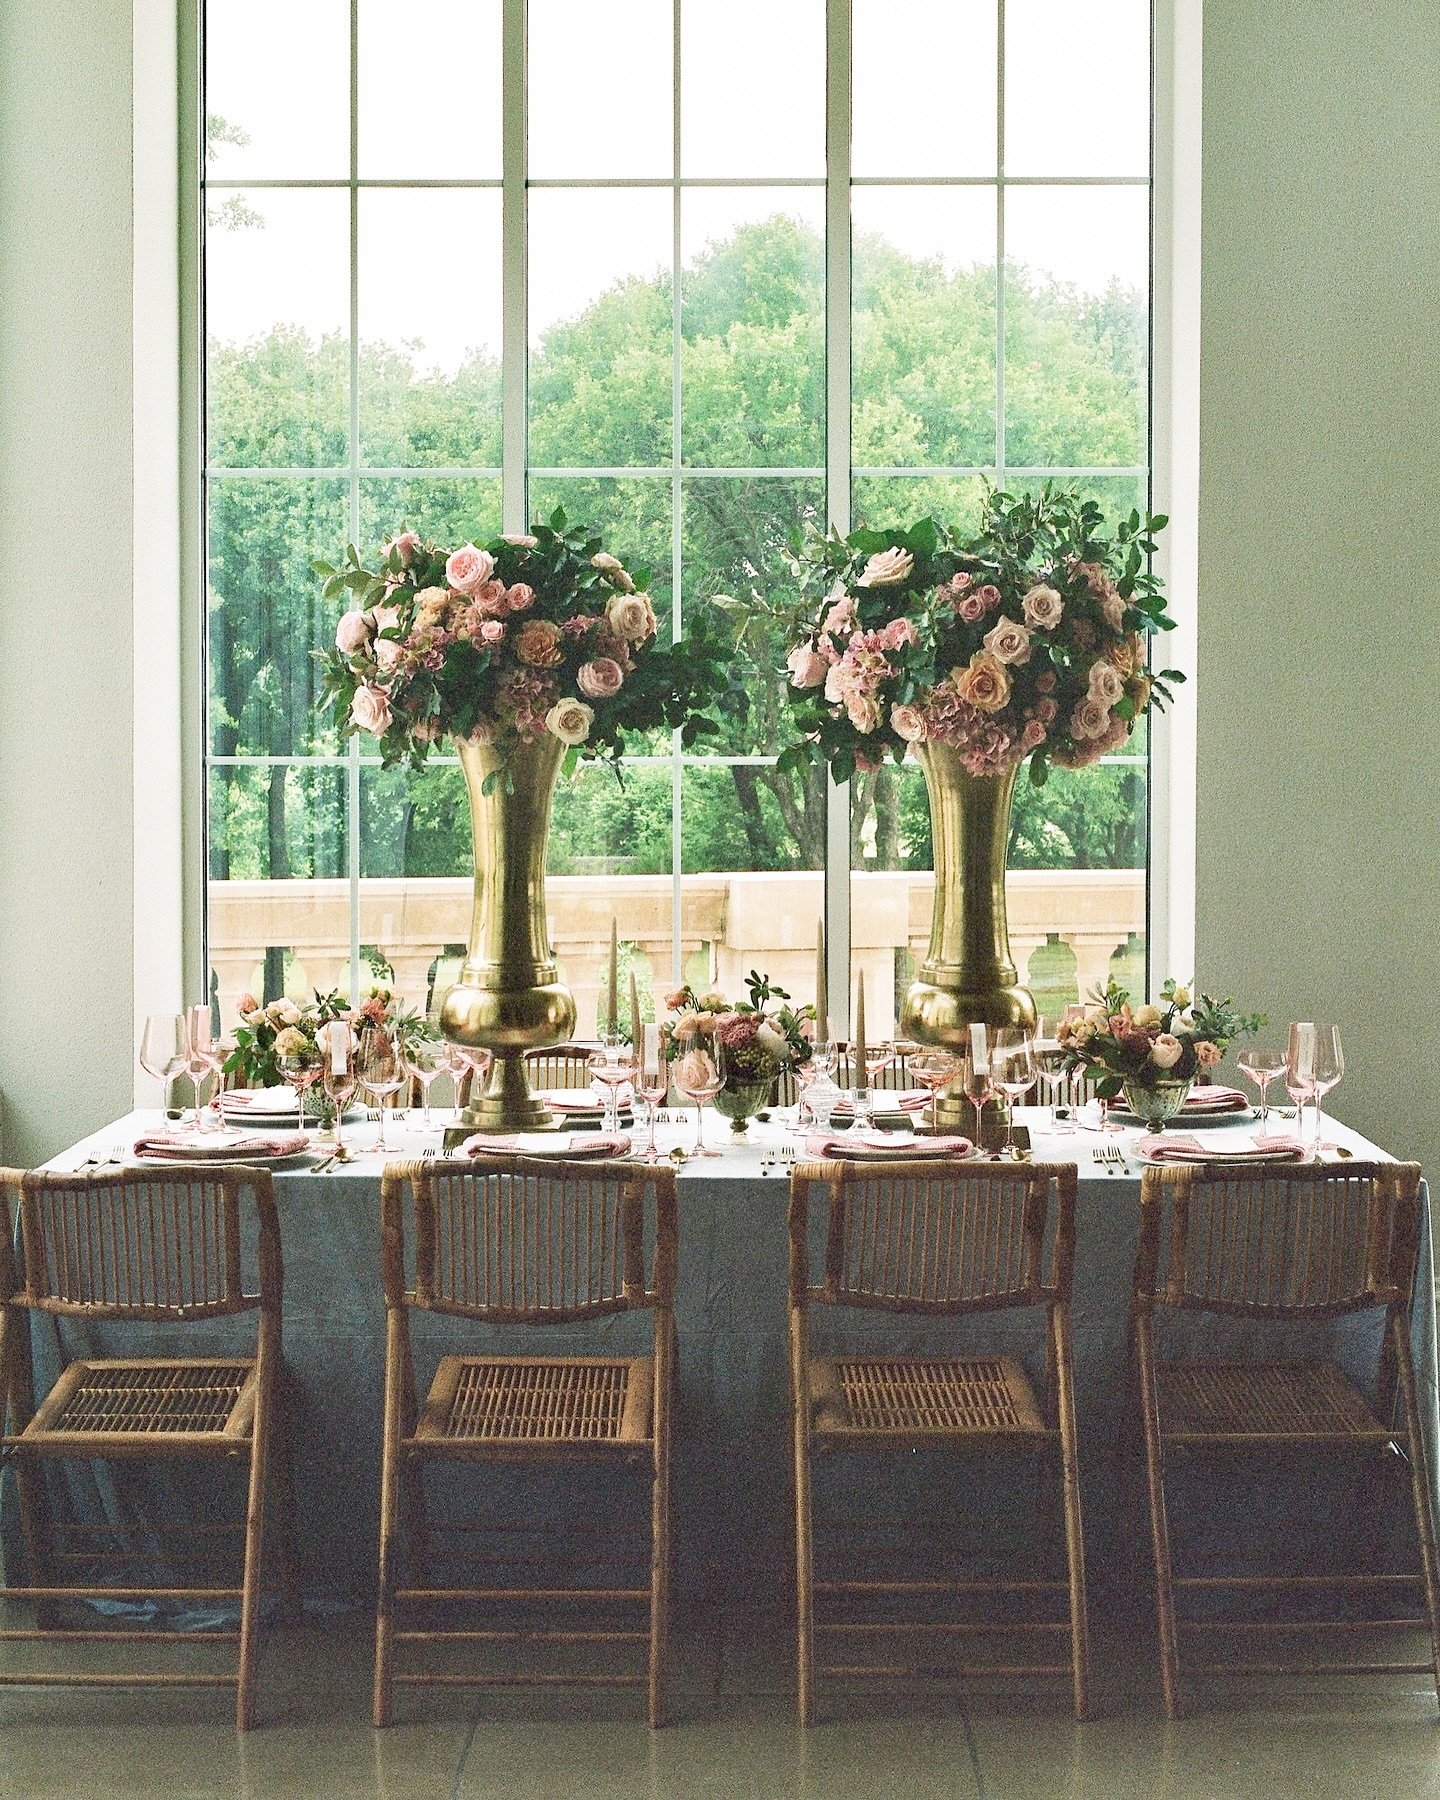 Head table showing off at The Olana &mdash;&mdash; on film processed by @richardphotolab